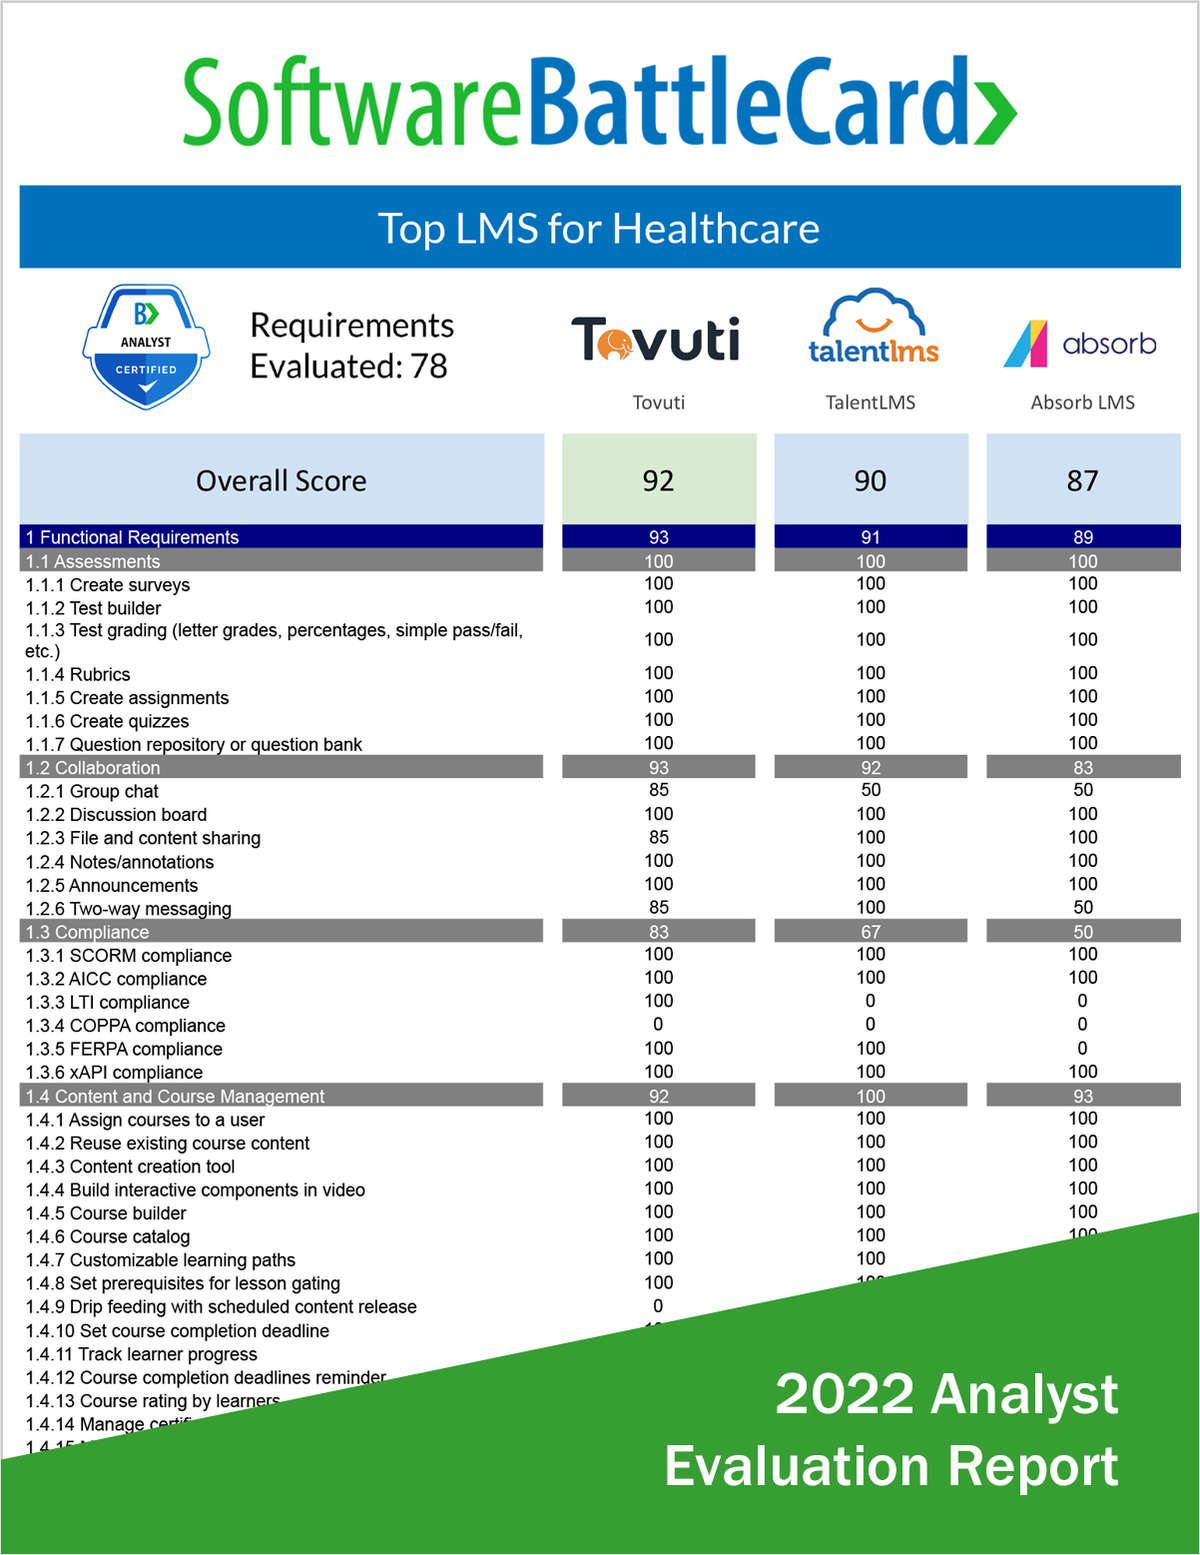 Top LMS Software for Healthcare--Tovuti vs. TalentLMS vs. Absorb LMS